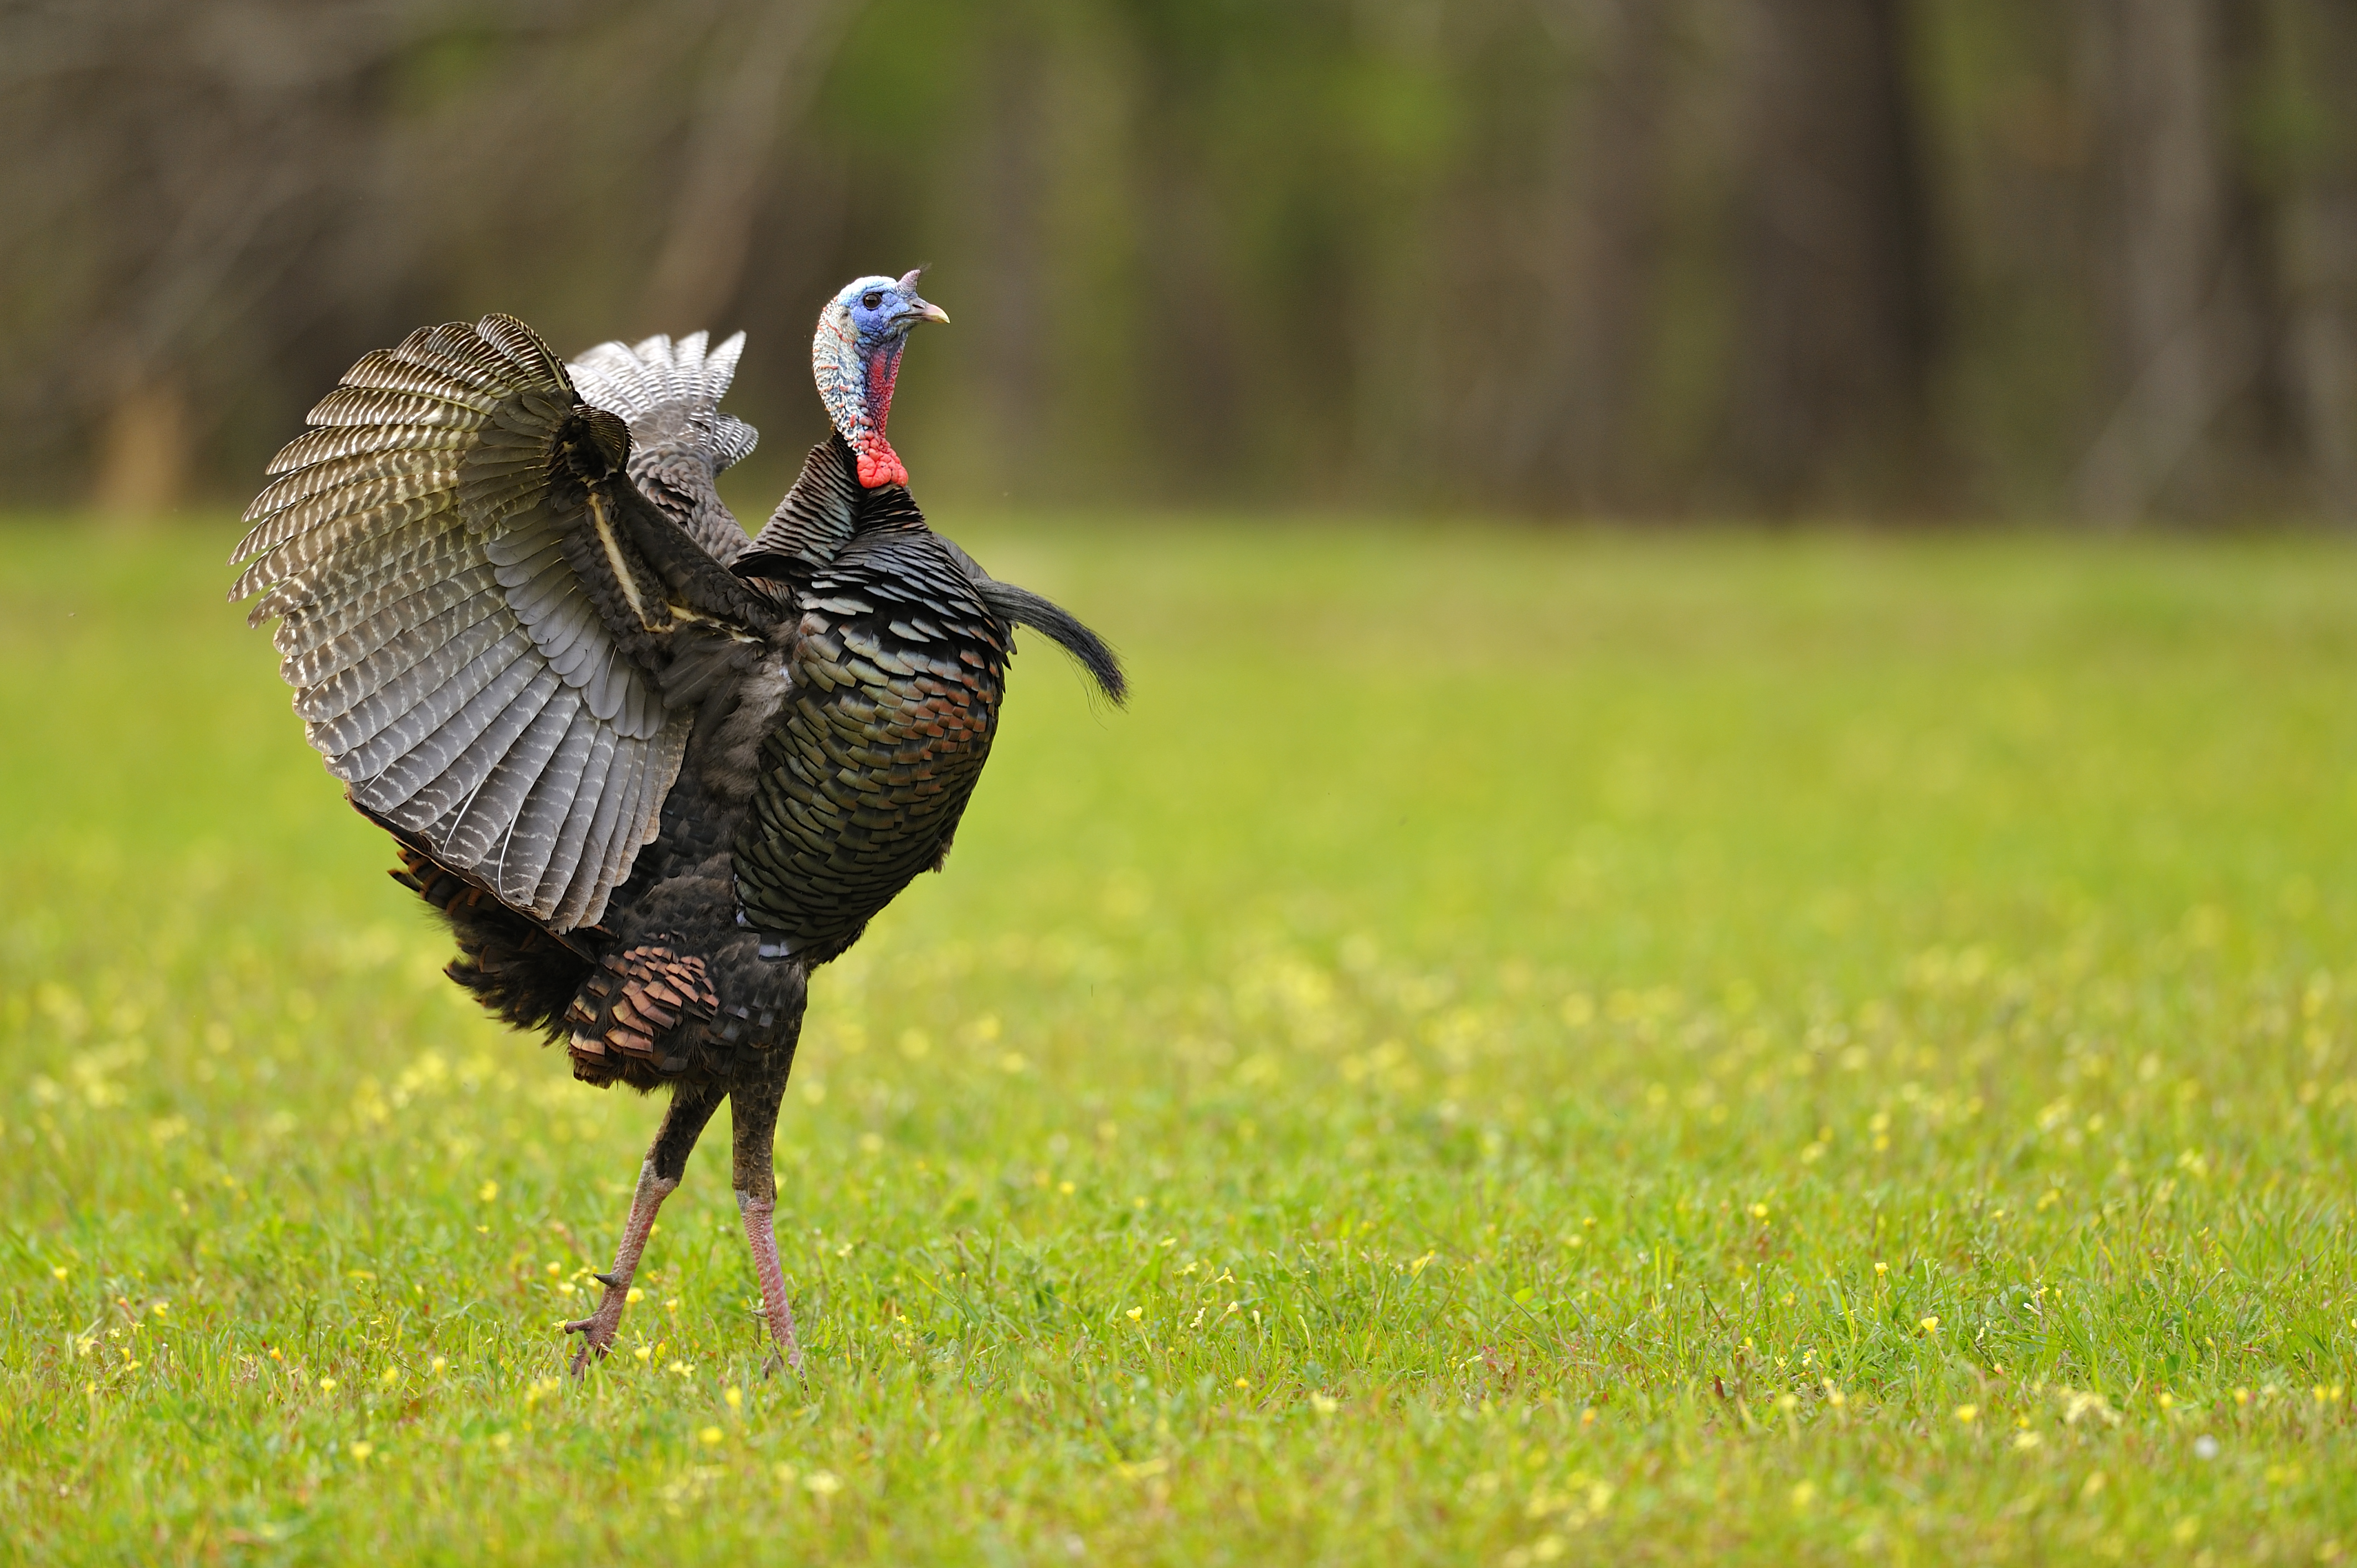 How do turkeys interact with each other?